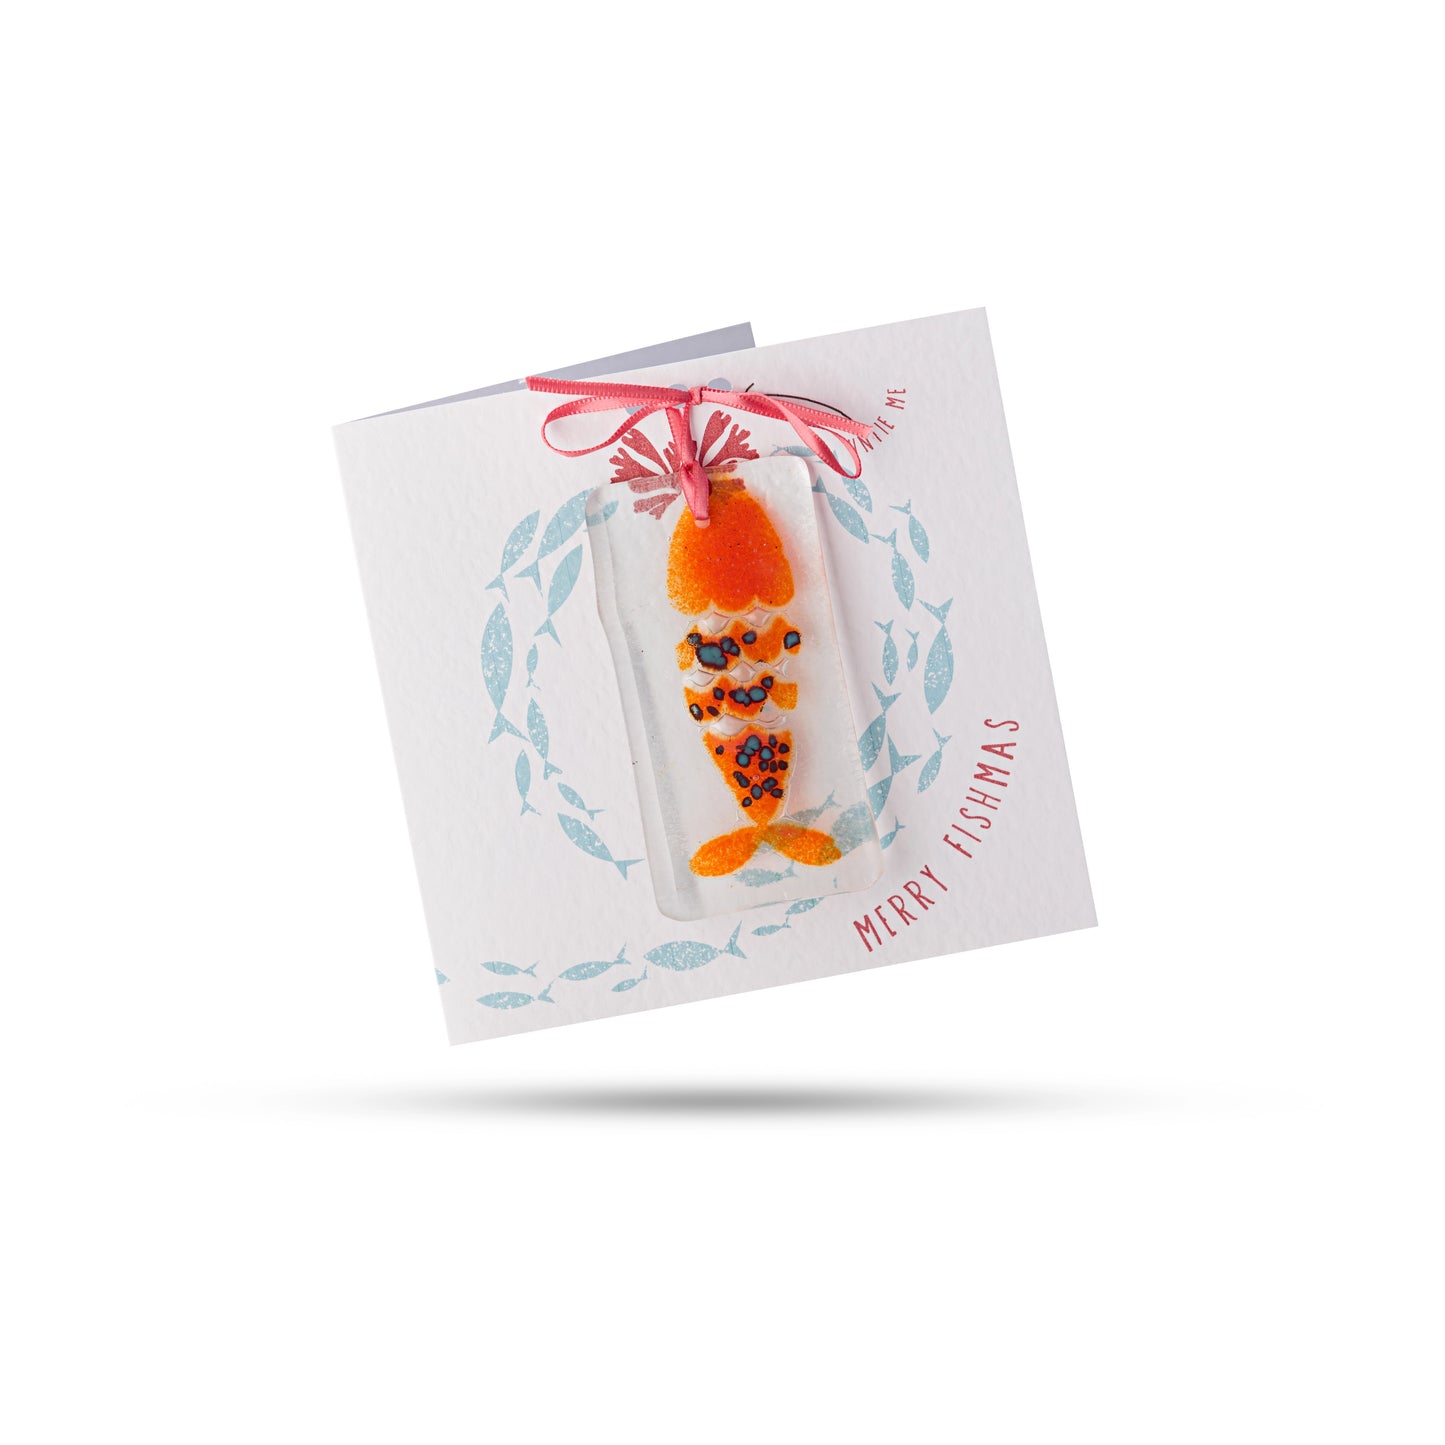 Merry Fishmas! (Solid) - Greeting Card With Fused Glass Gift - Mellow Monkey